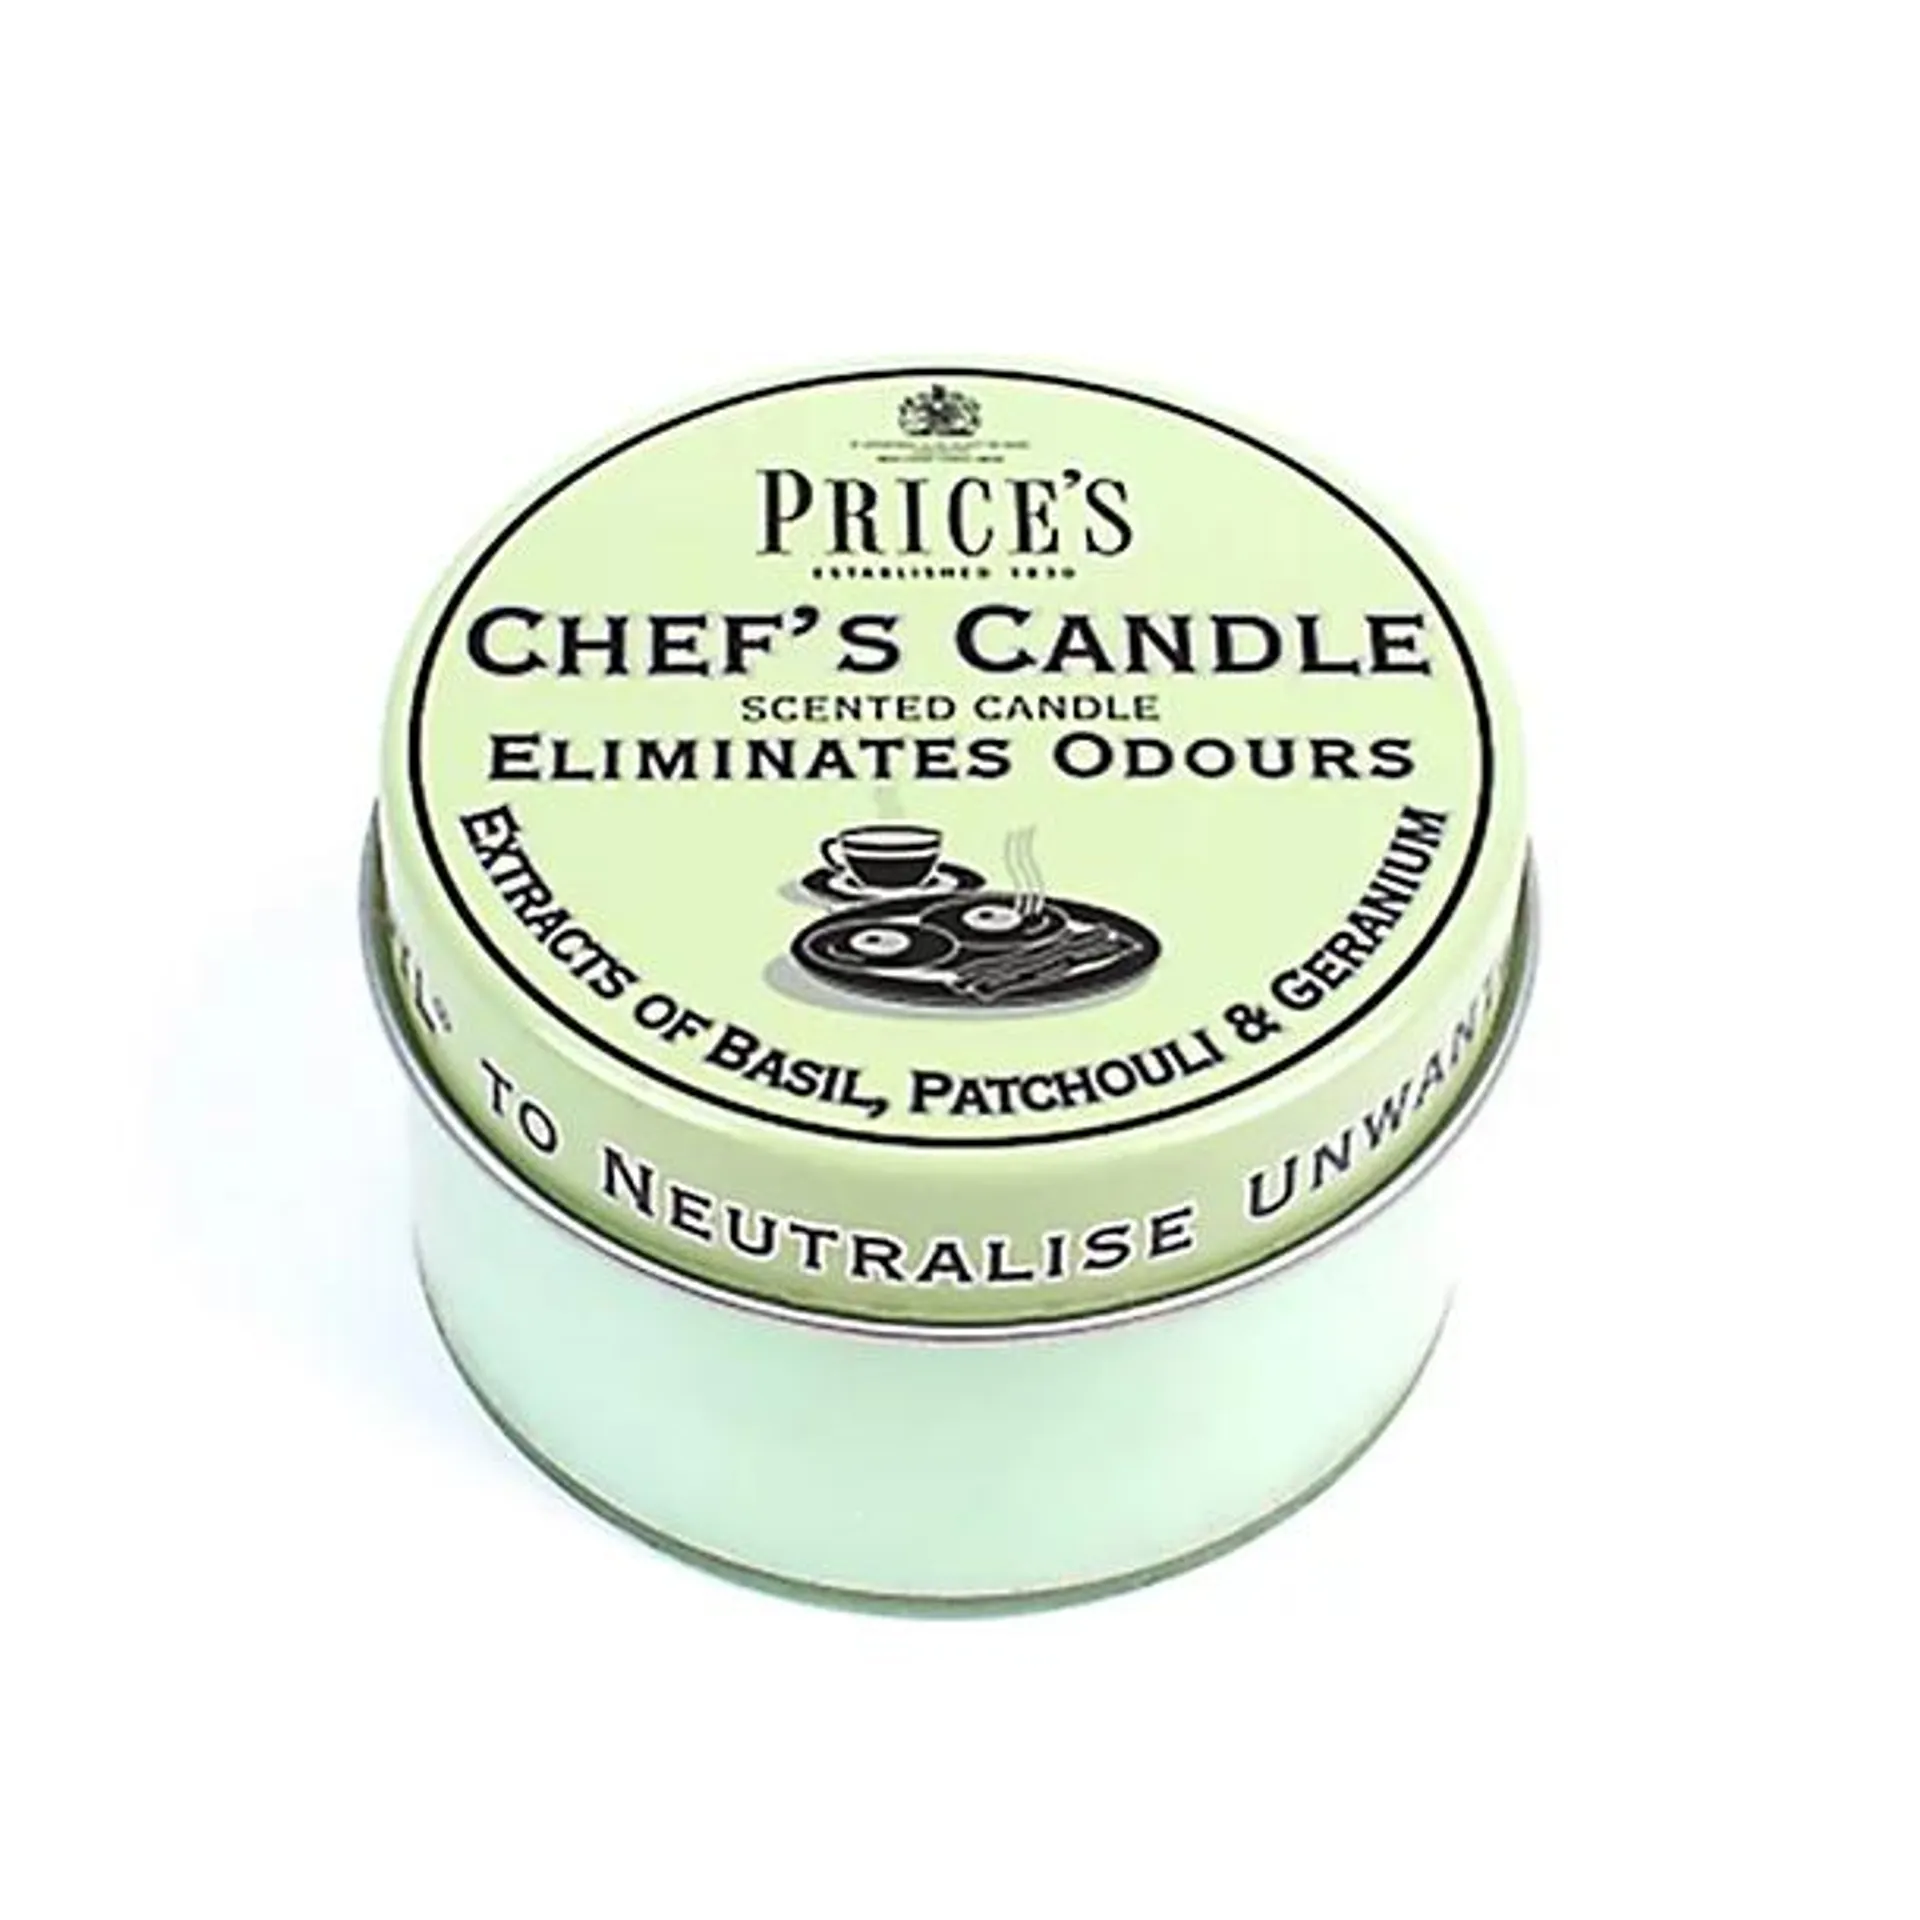 Prices Odour Eliminating Chefs Candle